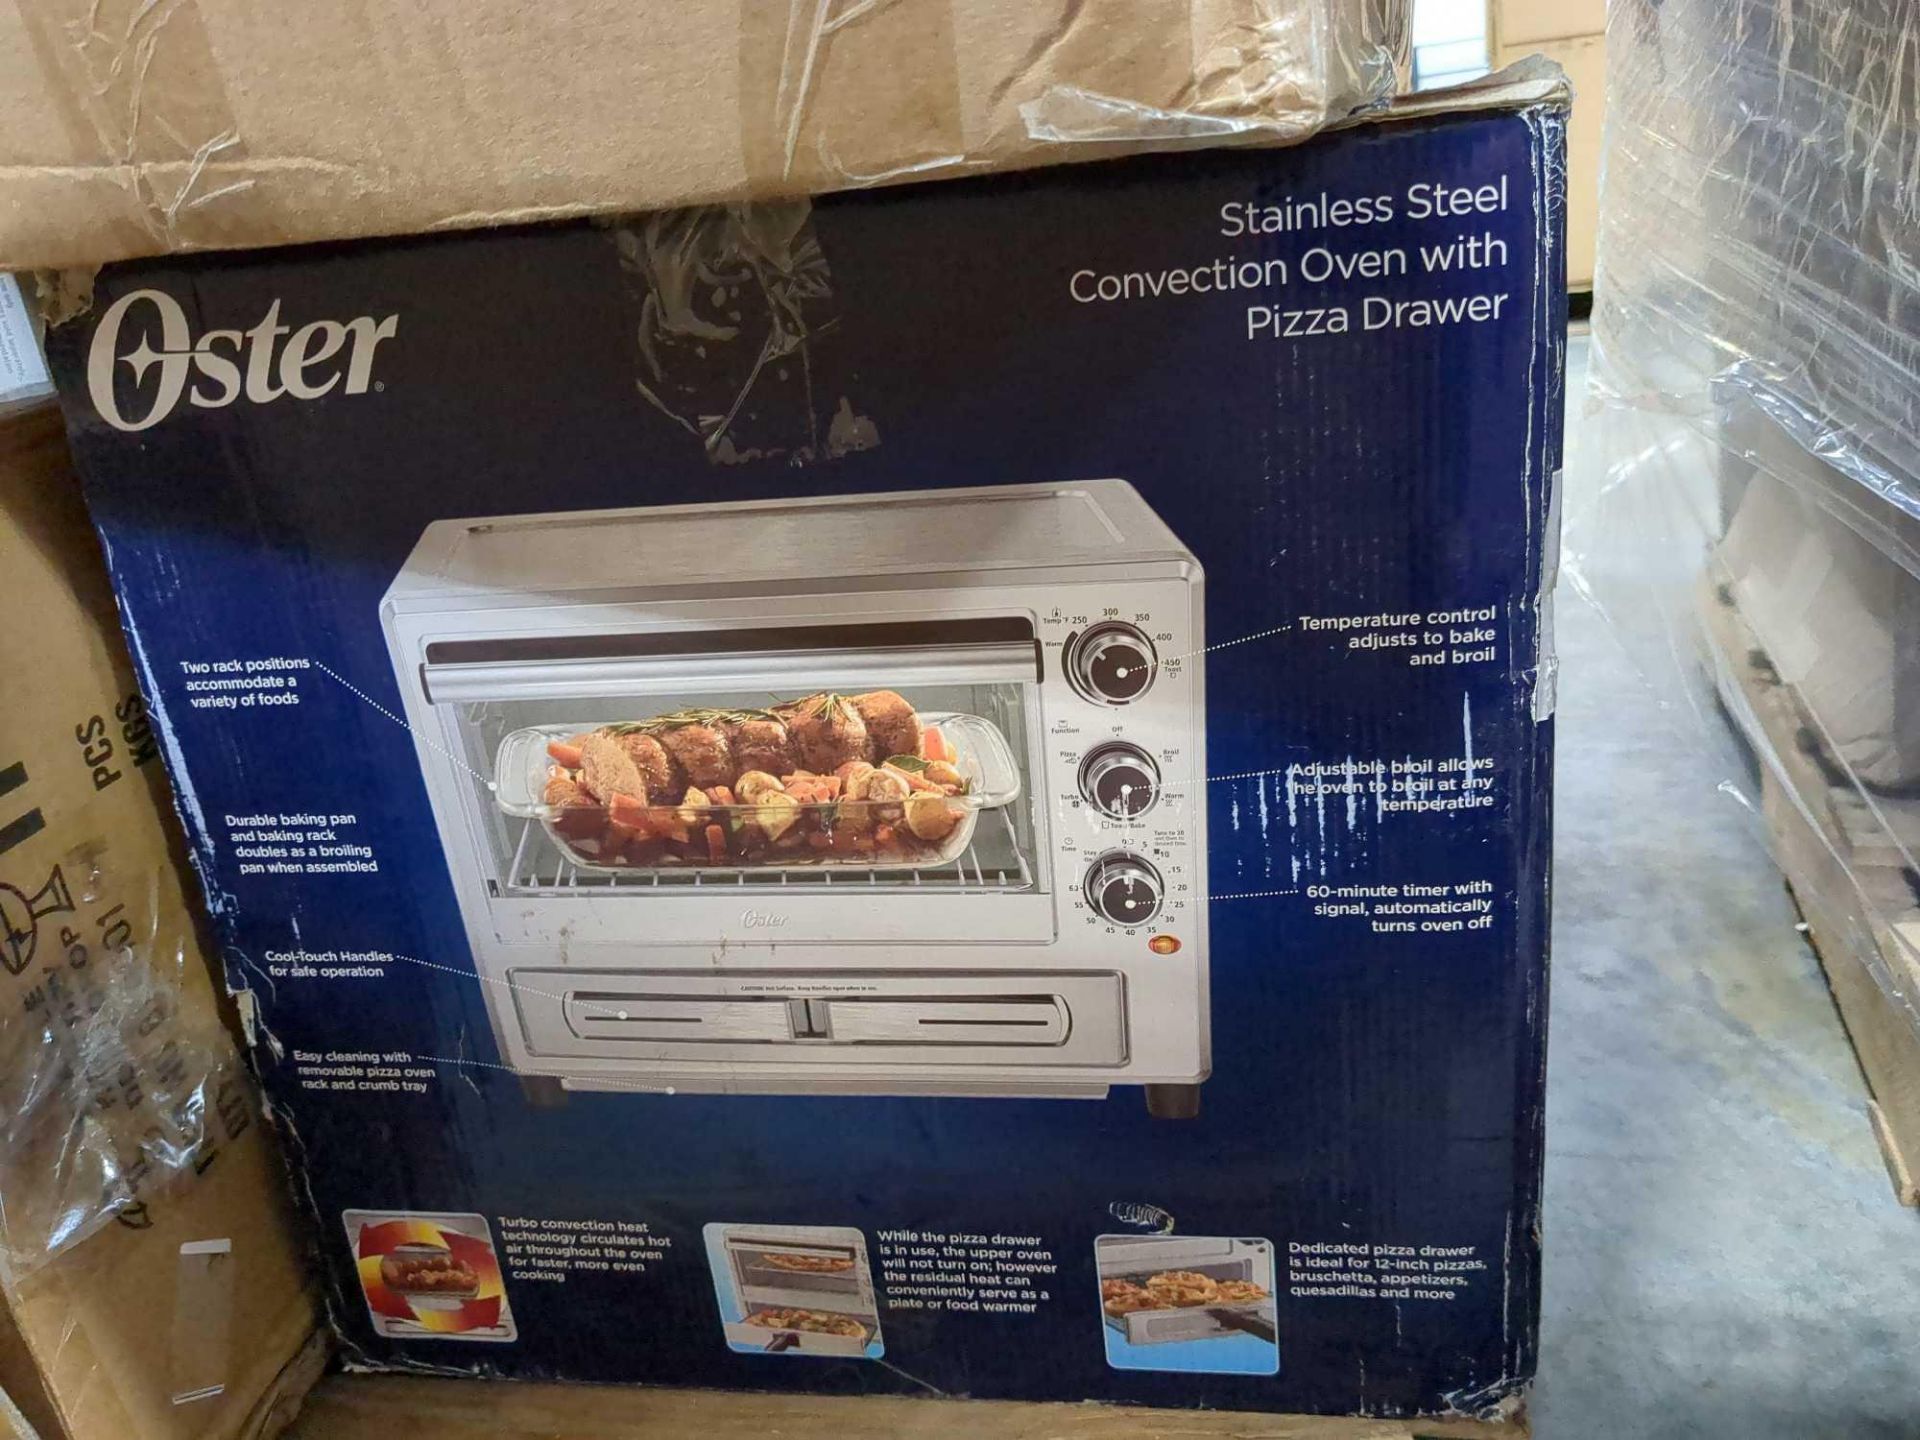 pentair prowler 920/ice maker/oster pizza oven - Image 9 of 9